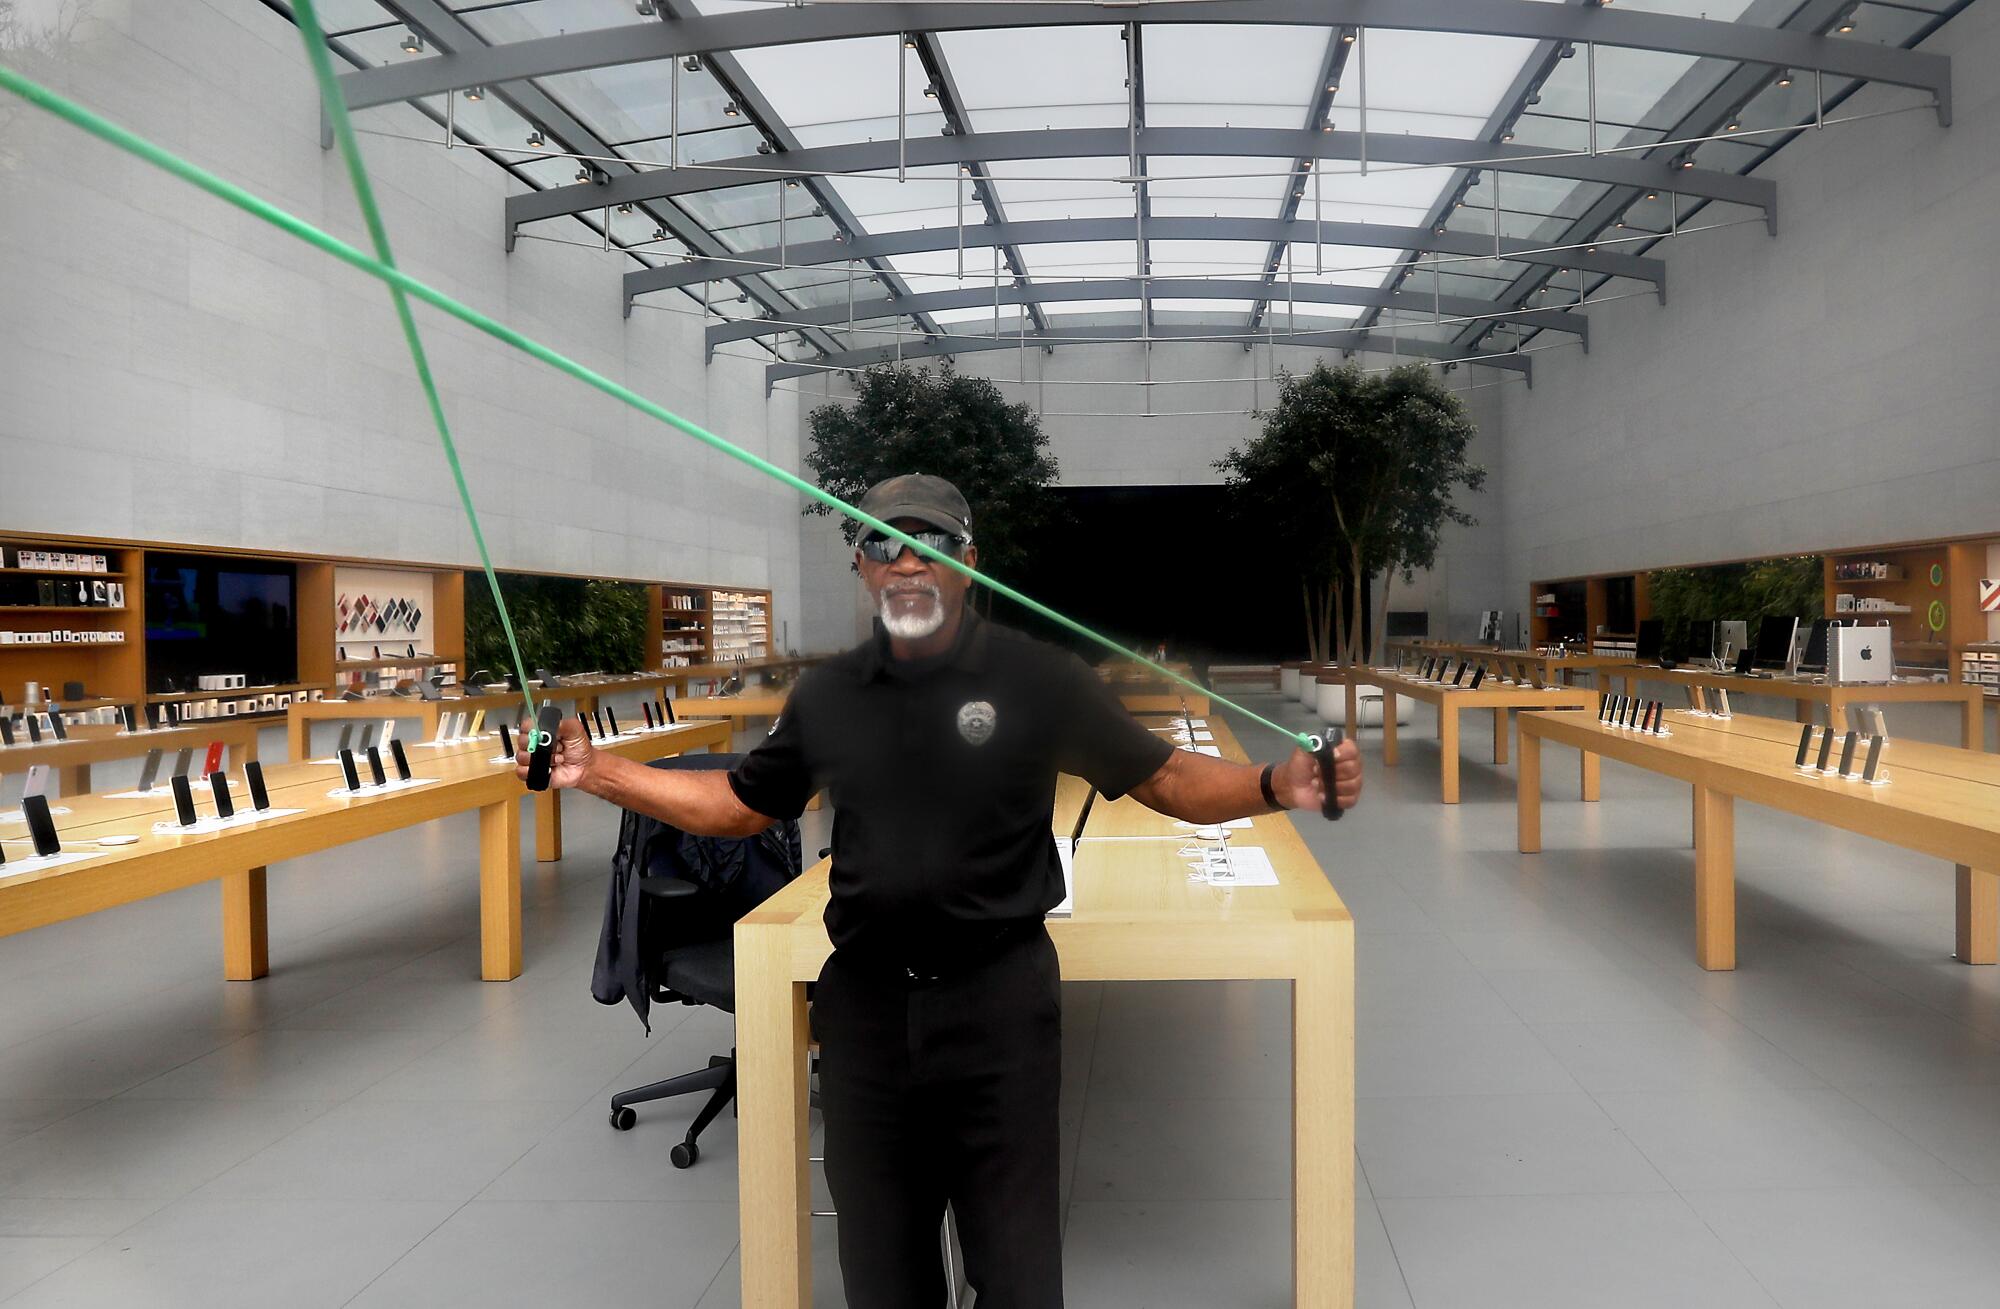 A security guard gets some exercise while keeping watch on the Apple Store at the Third Street Promenade in Santa Monica. As coronavirus restrictions are loosened, retail shops are allowed to reopen if they provide curbside pickup and practice social distancing.